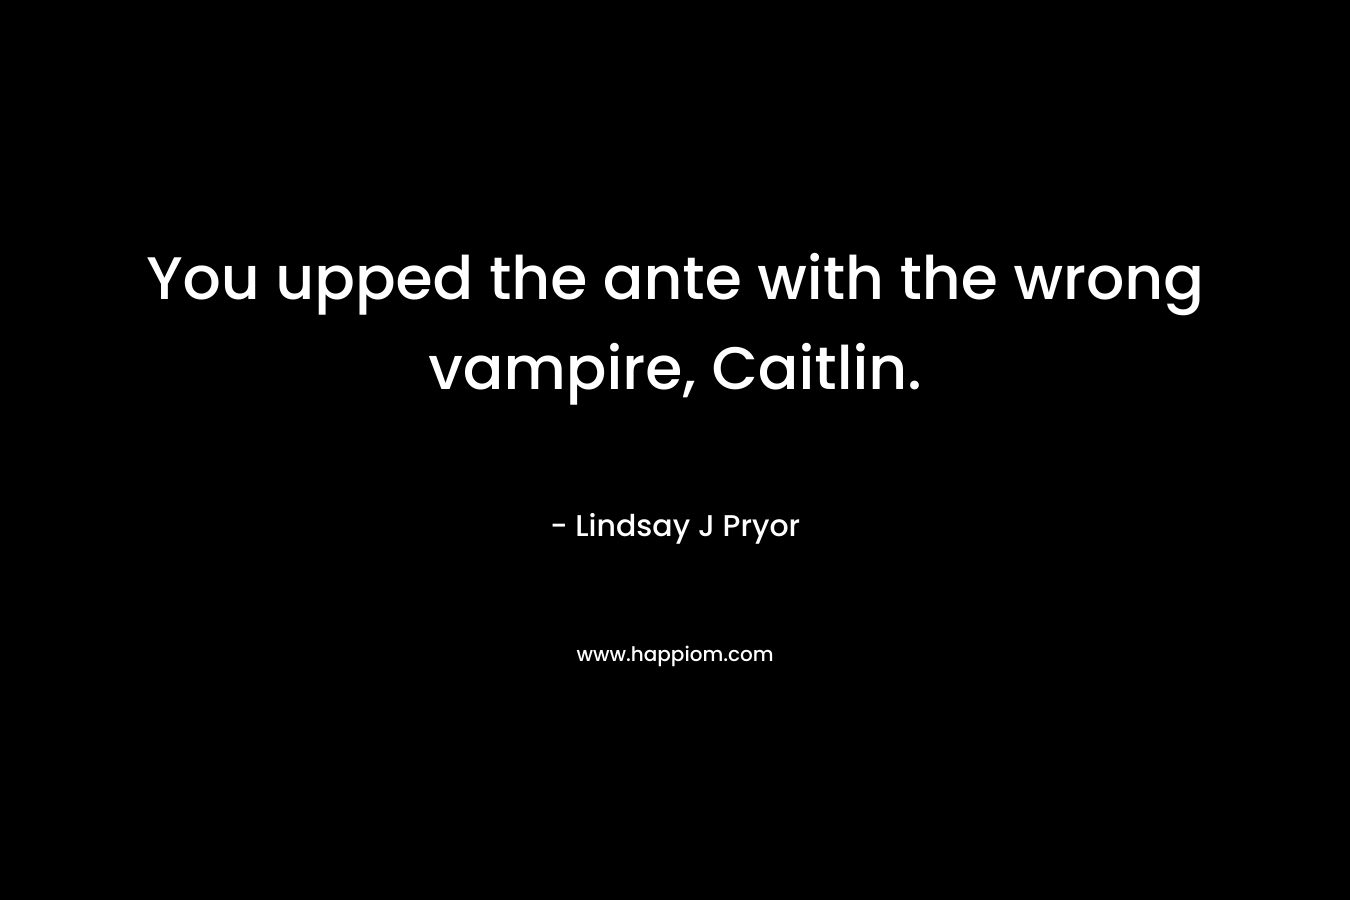 You upped the ante with the wrong vampire, Caitlin.